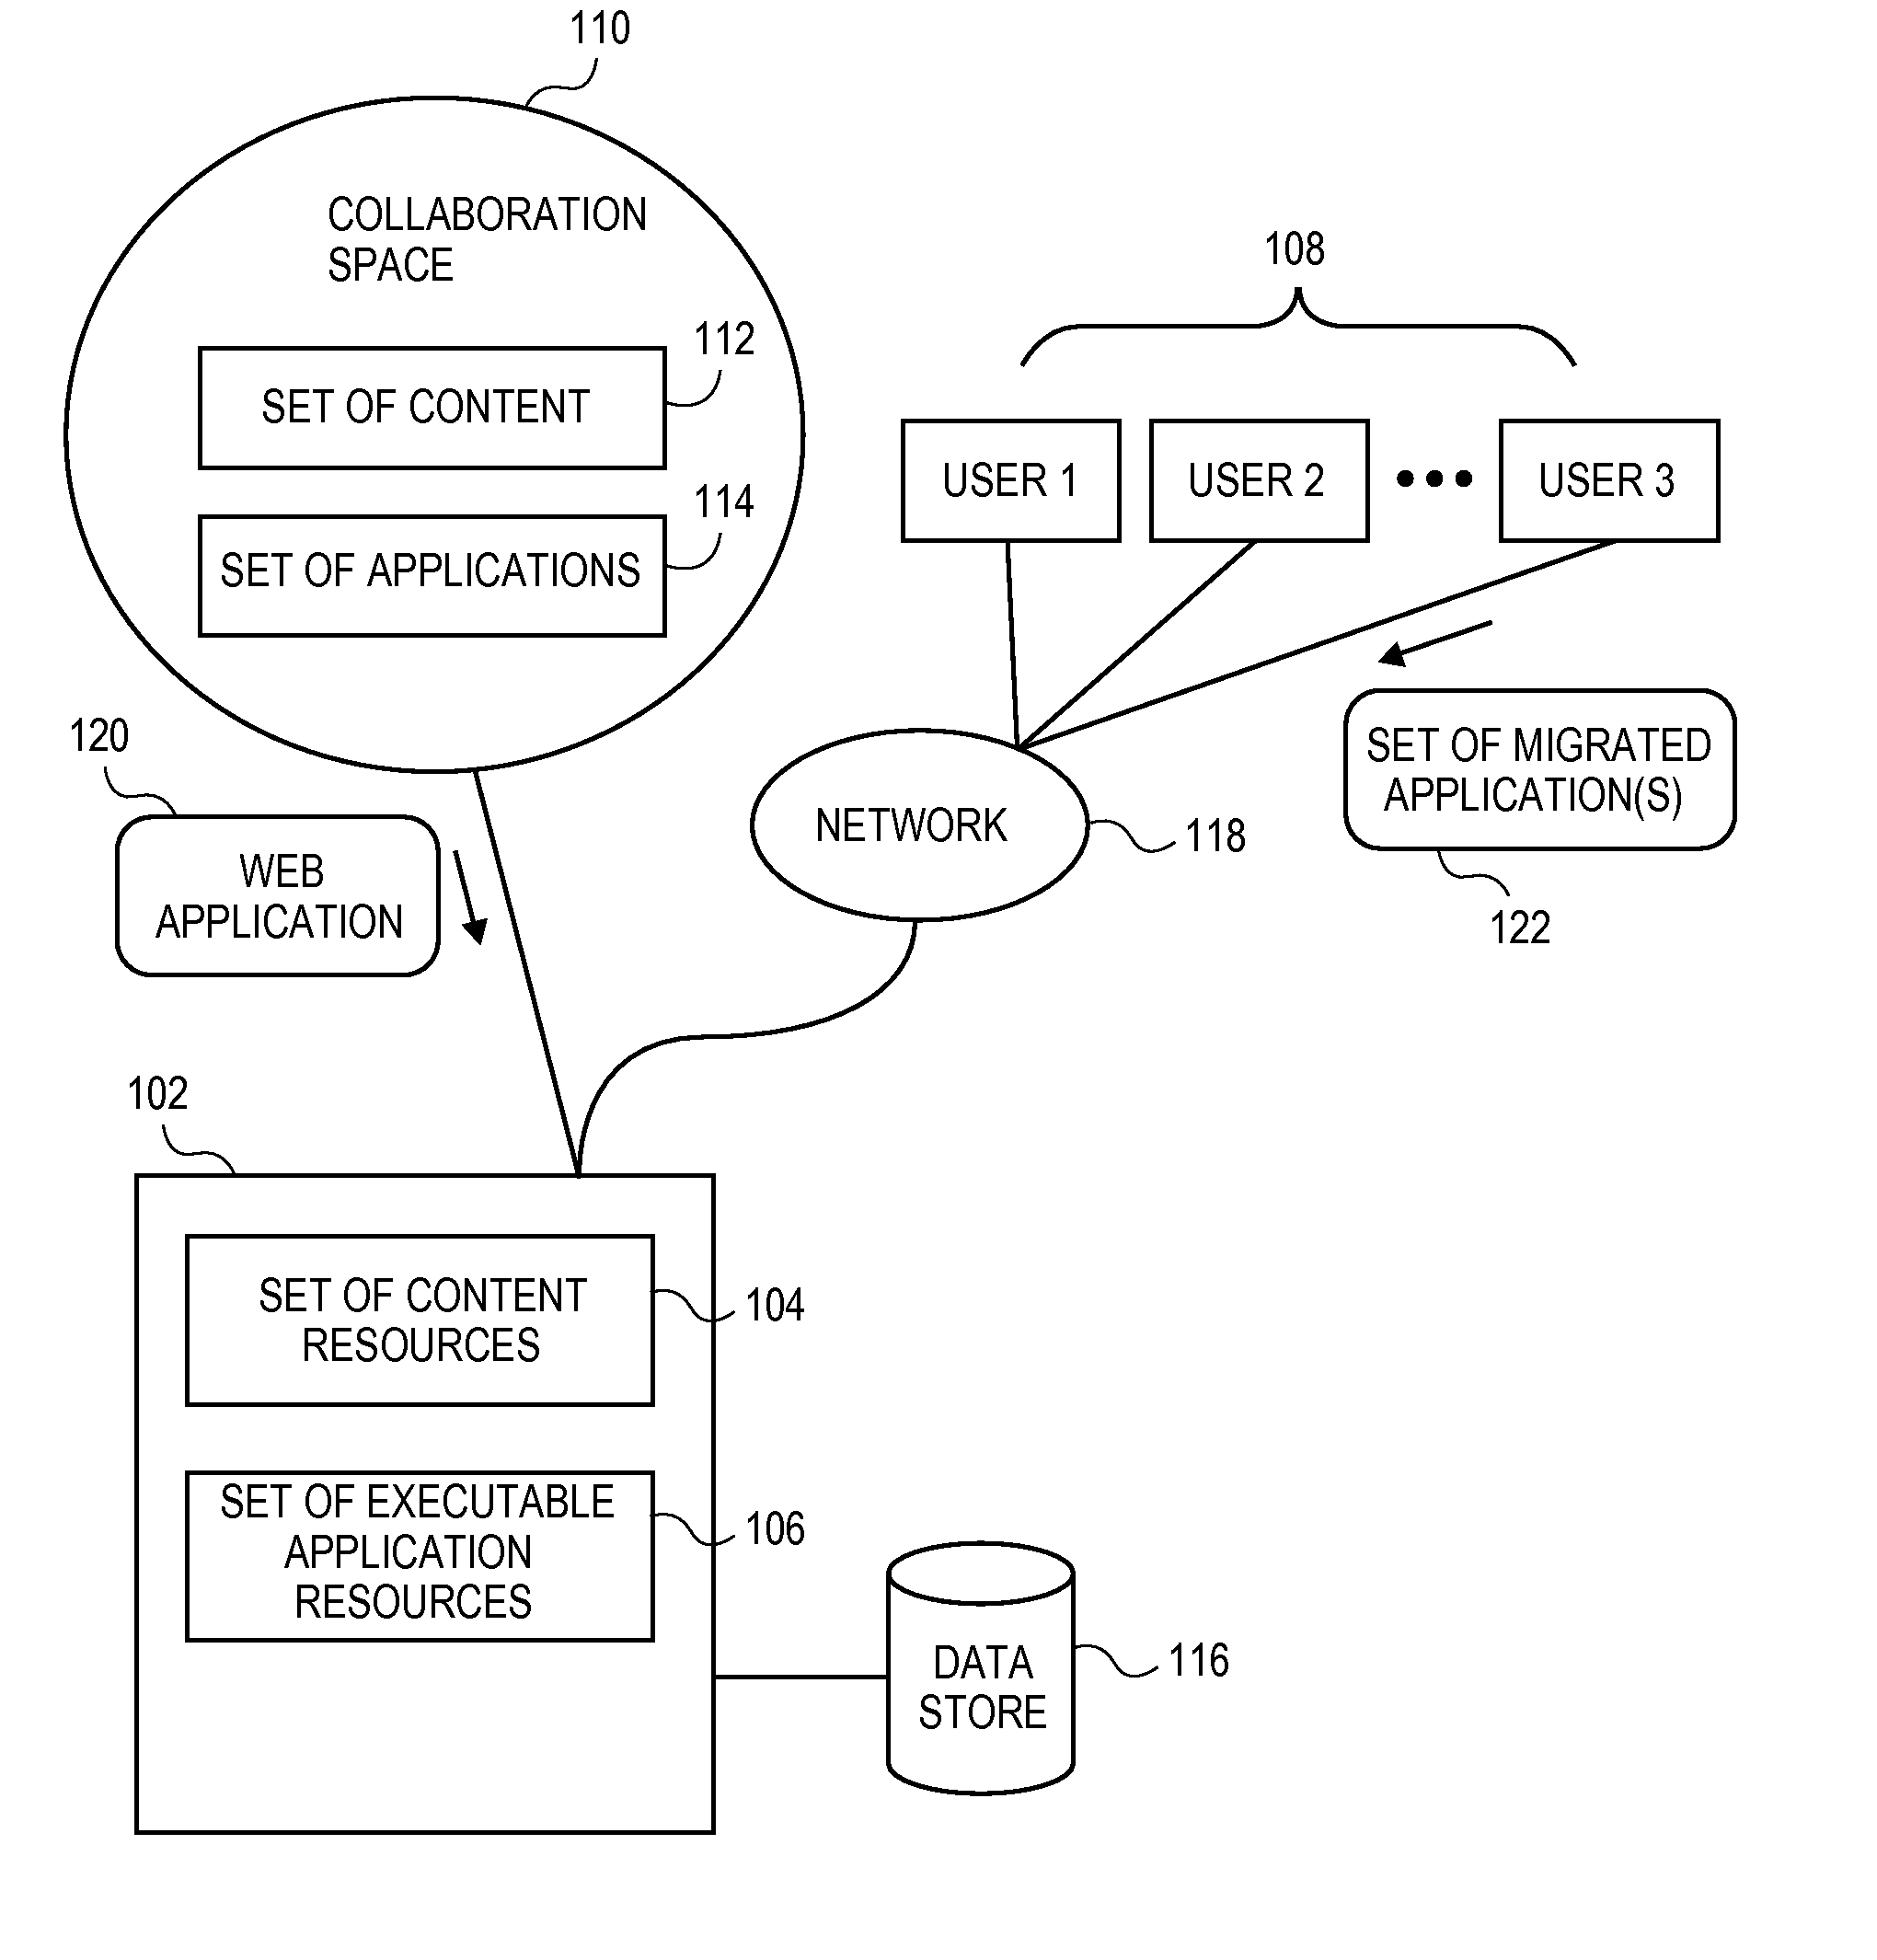 Systems and methods for managing a collaboration space having application hosting capabilities